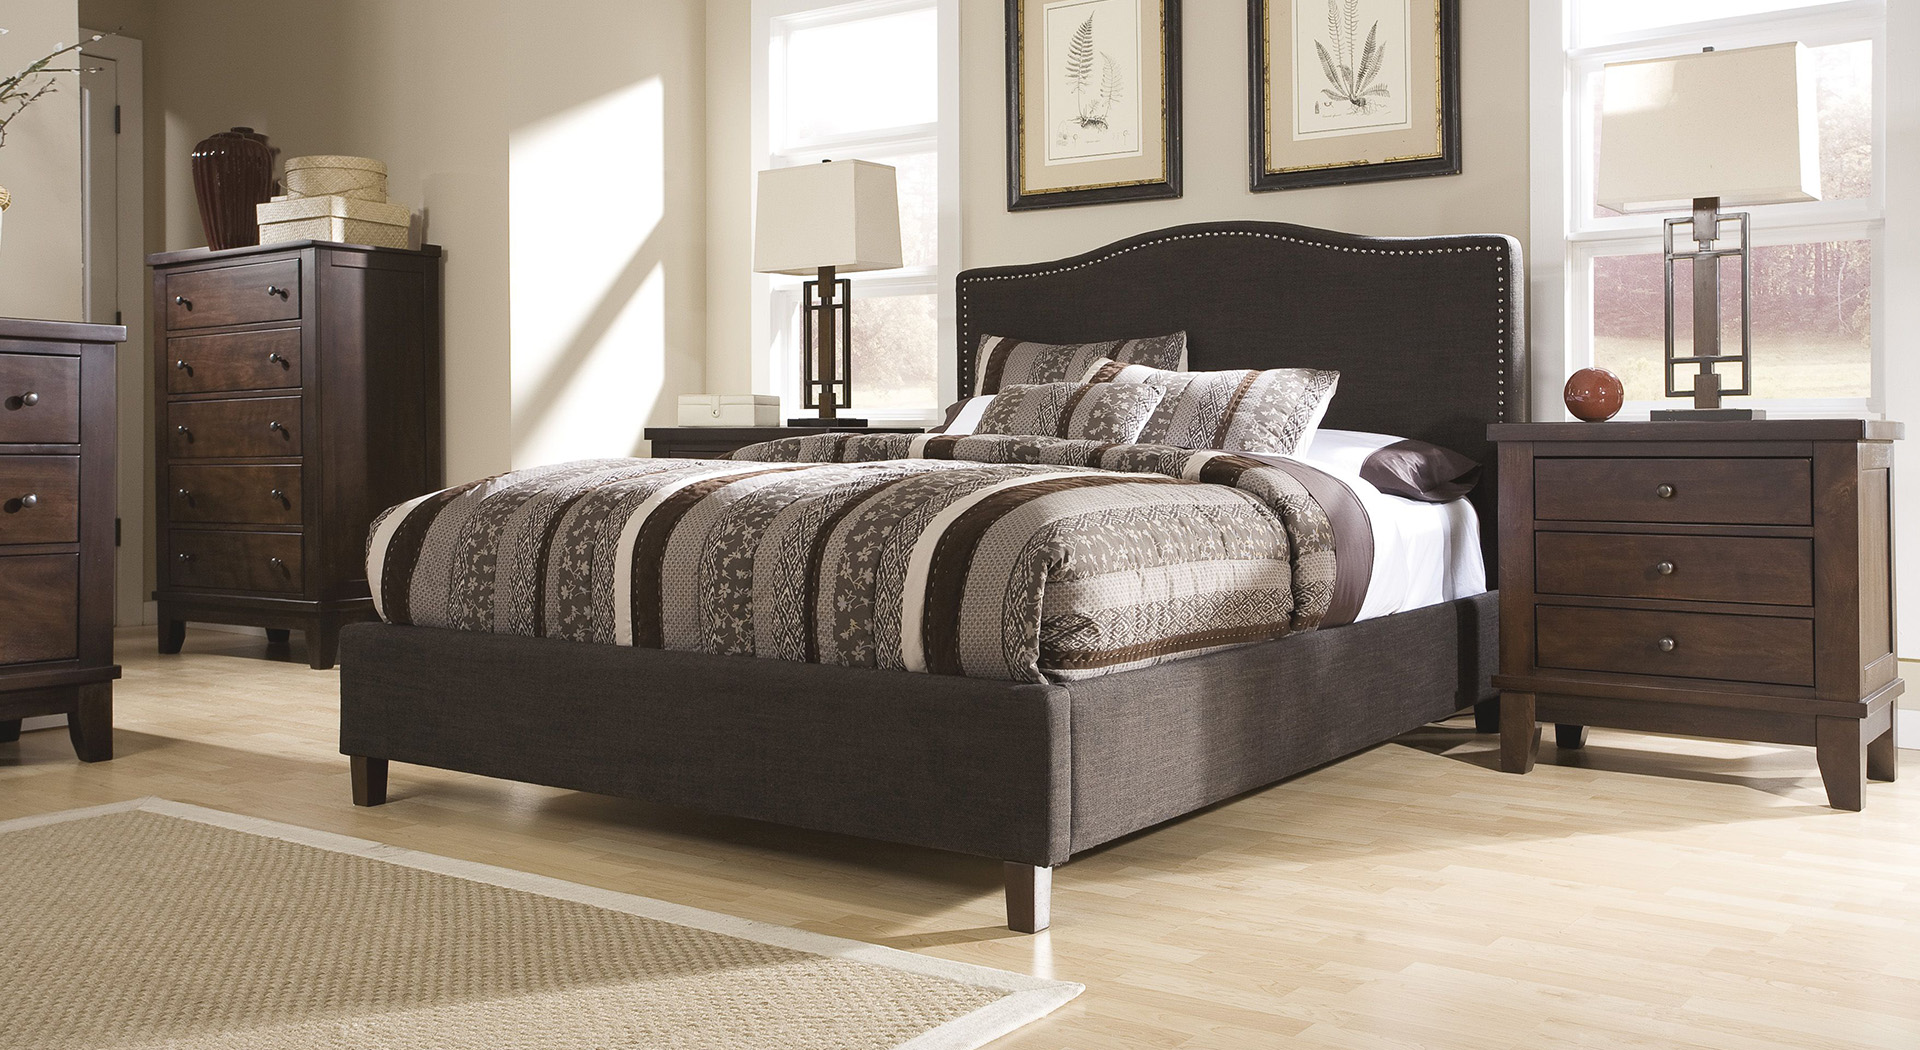 A queen-size bed with grey decor and a striped comforter 